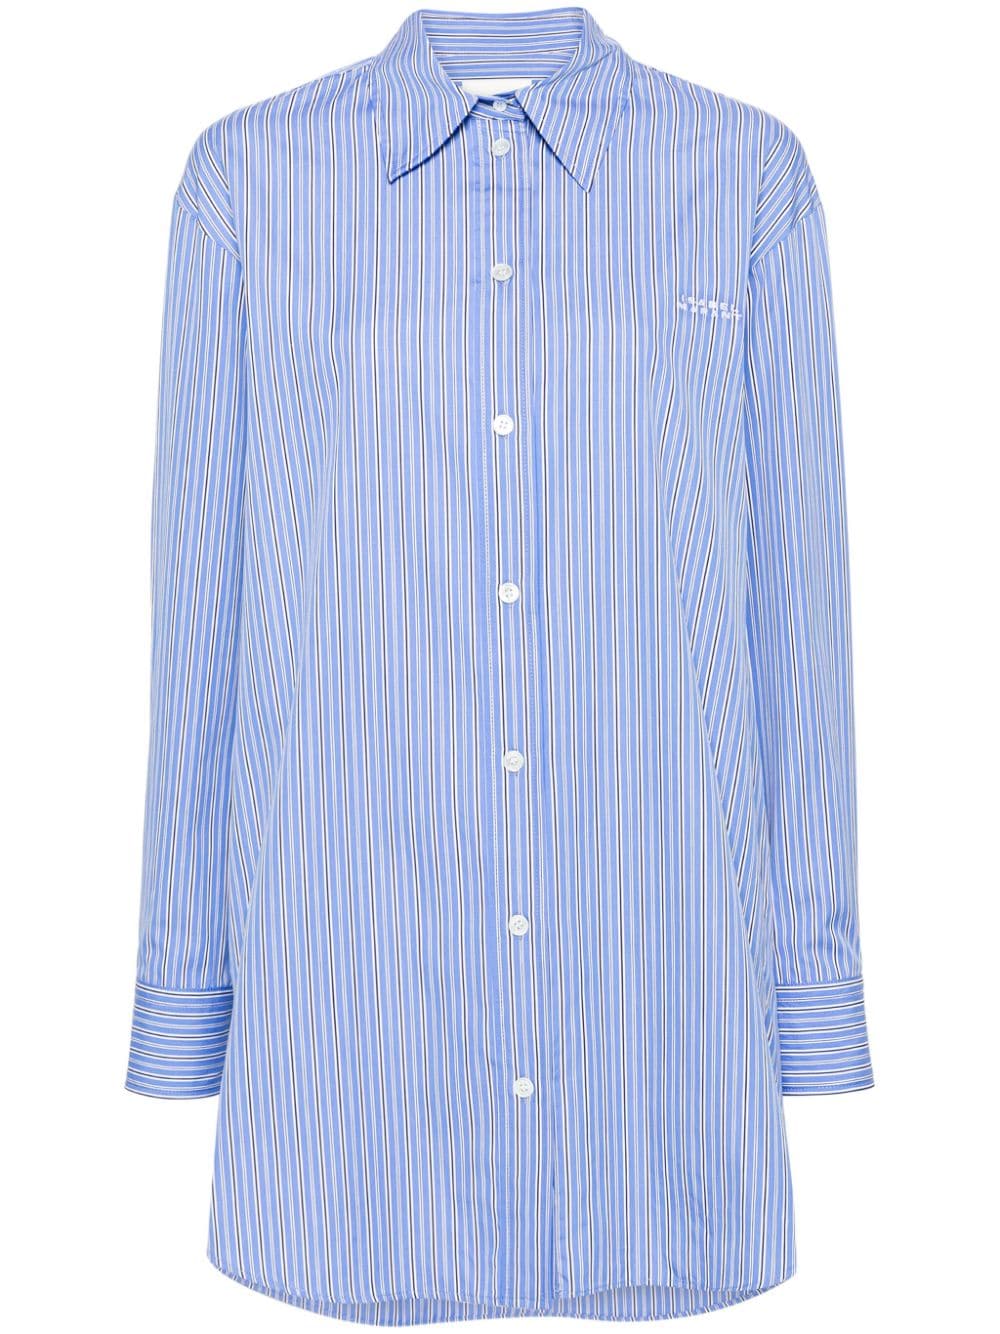 Striped shirt with embroidery